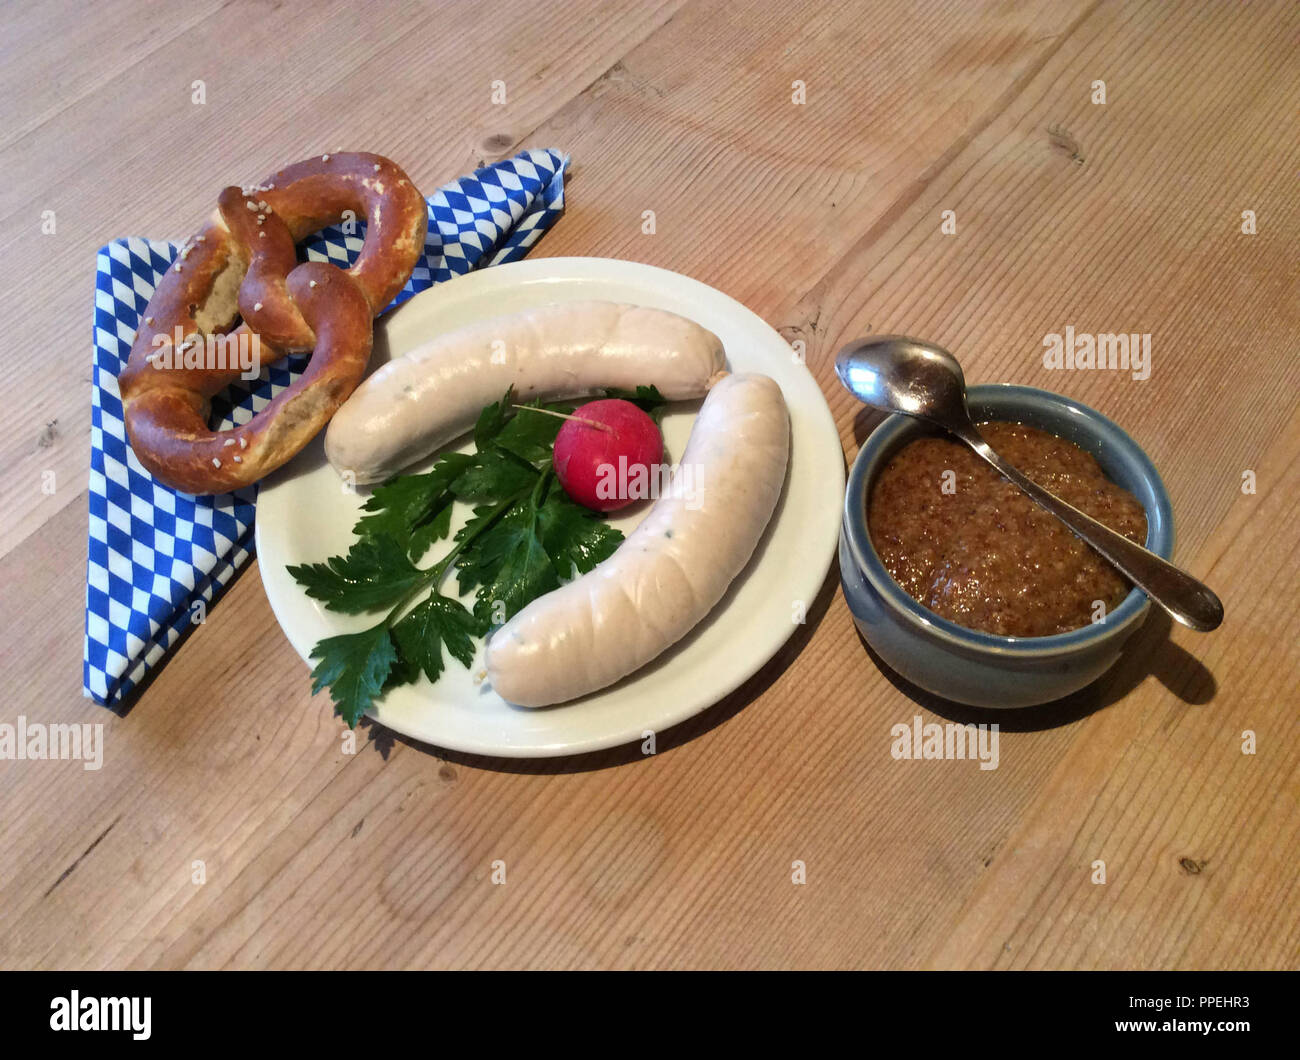 Weisswurst snack or breakfast with pretzel, a radish, parsley and mustard on a rustic wooden table. Stock Photo